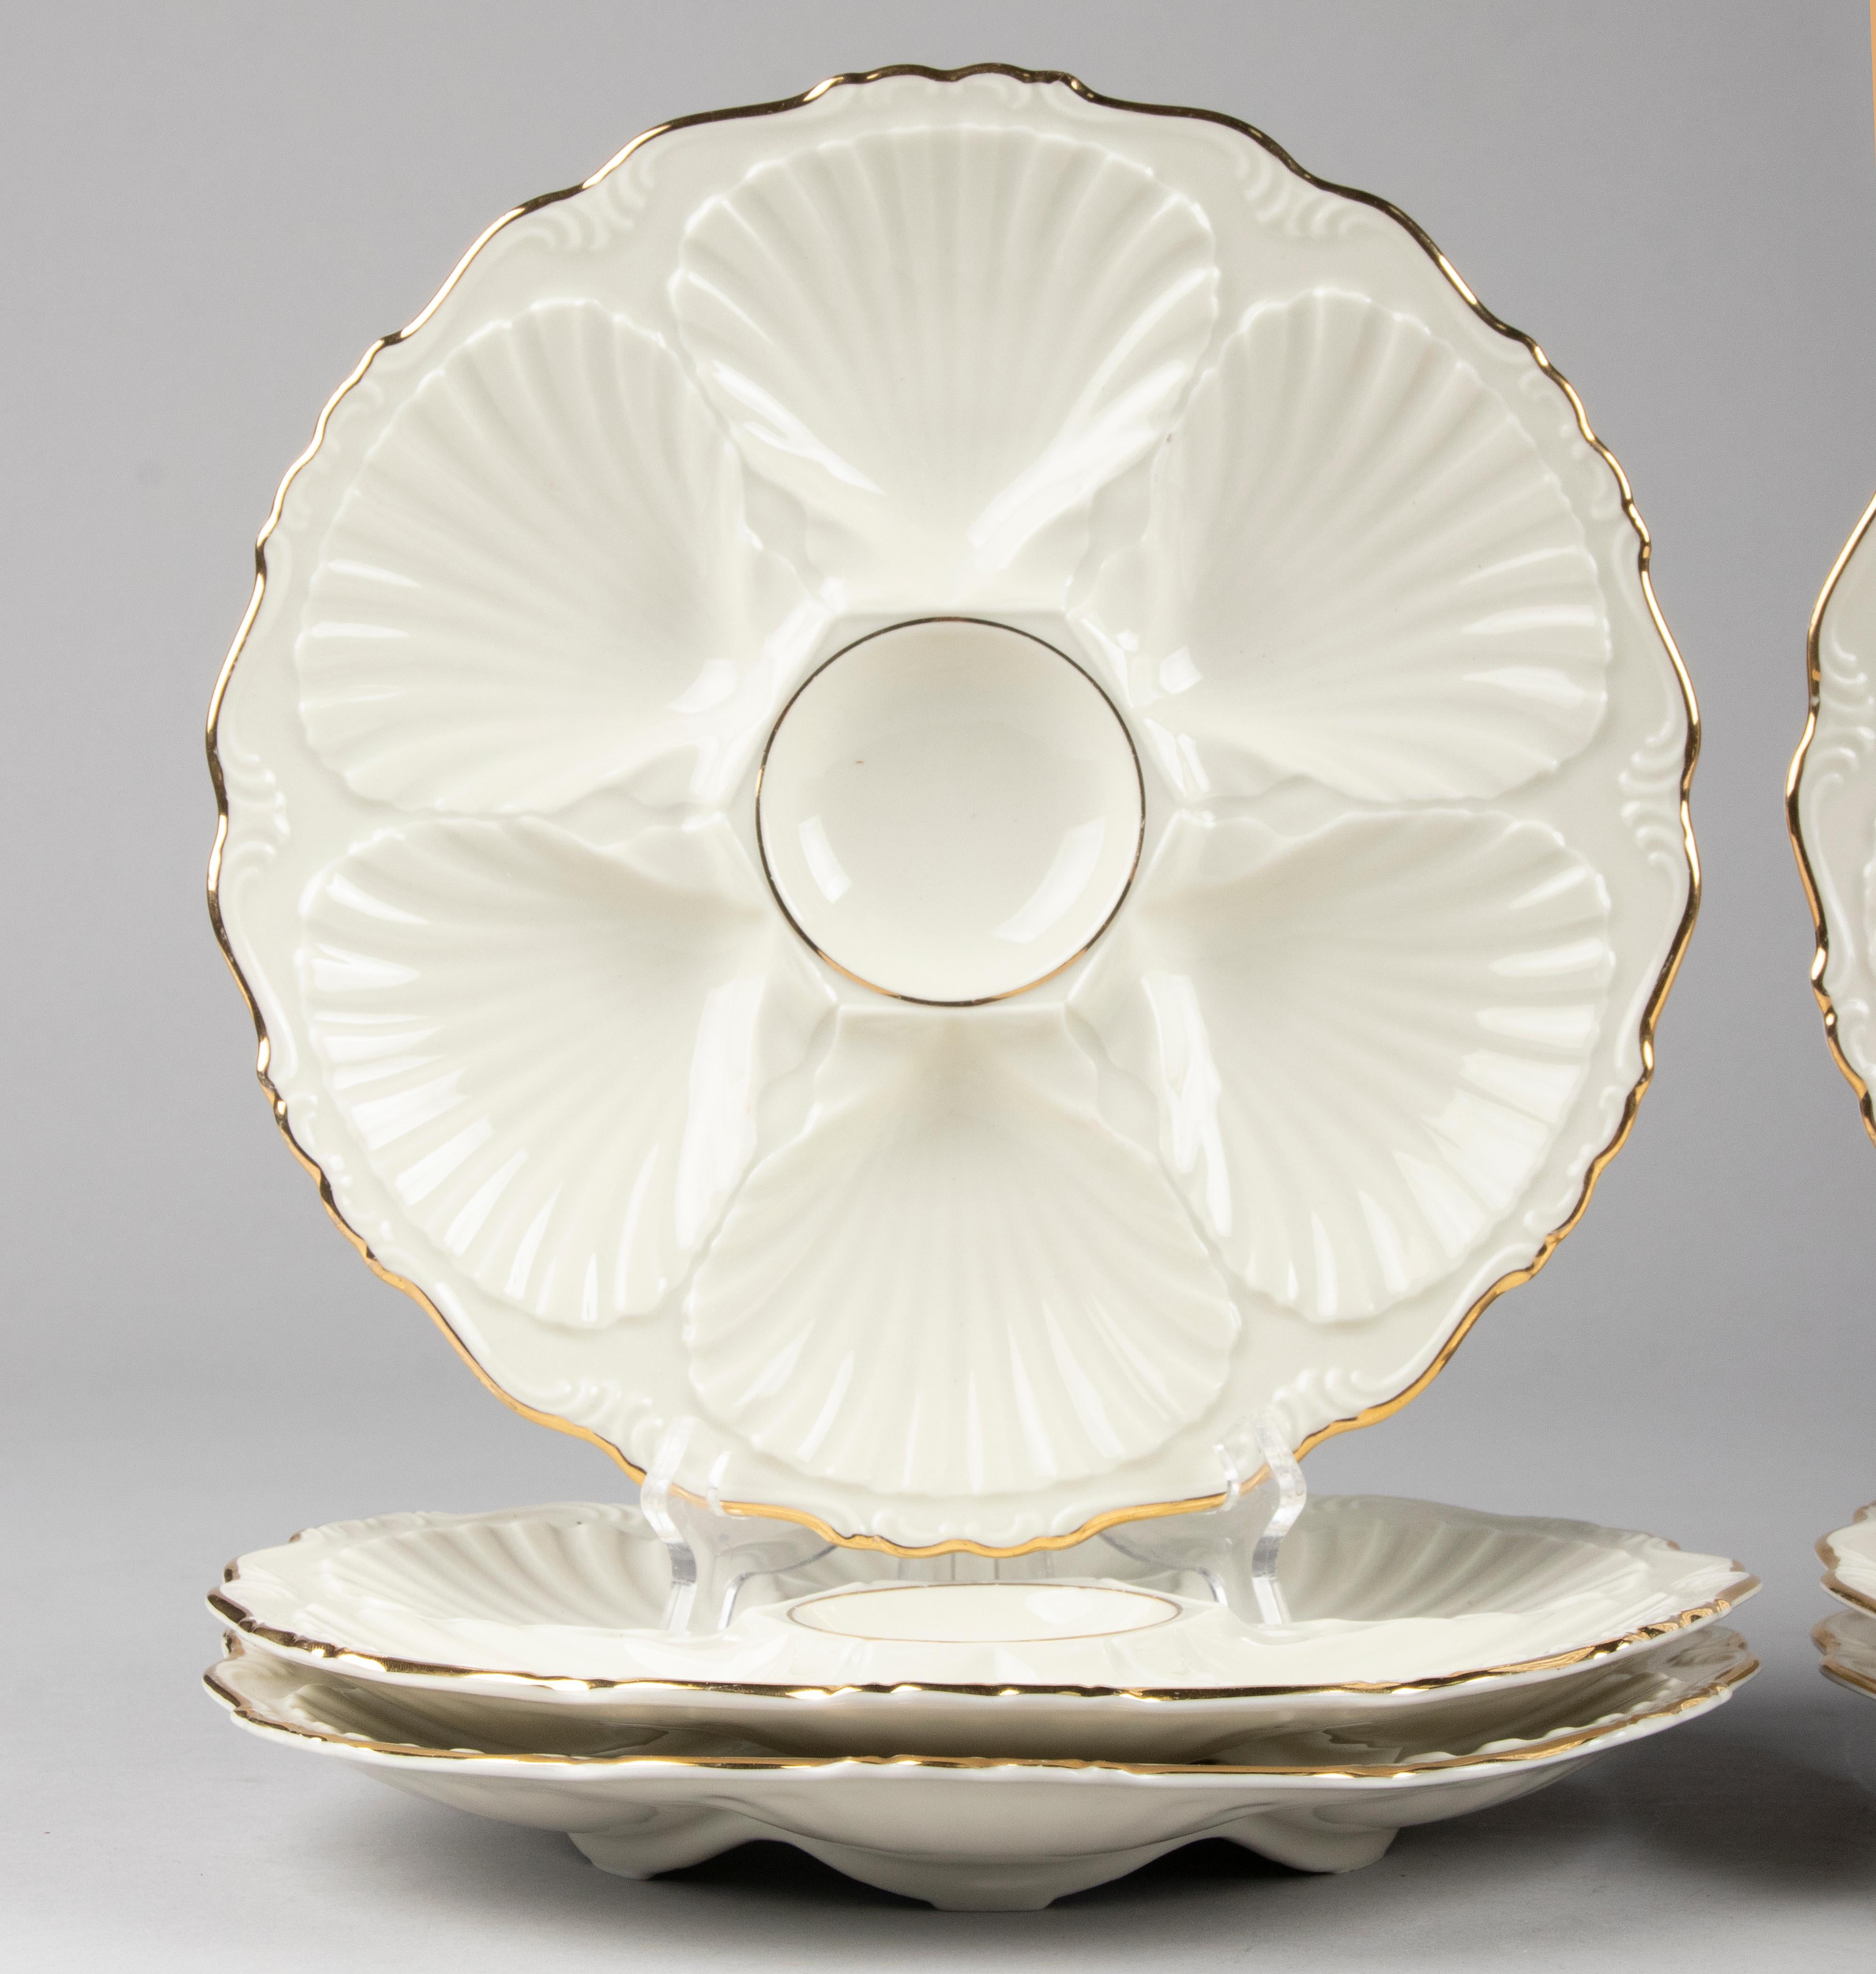 Set of 6 porcelain oyster plates from the German brand Edelstein Bavaria. The plates are ivory colored and have gold colored edges. The plates are decorated with a shell pattern in relief. All plates are marked on the bottom. The plates are in good